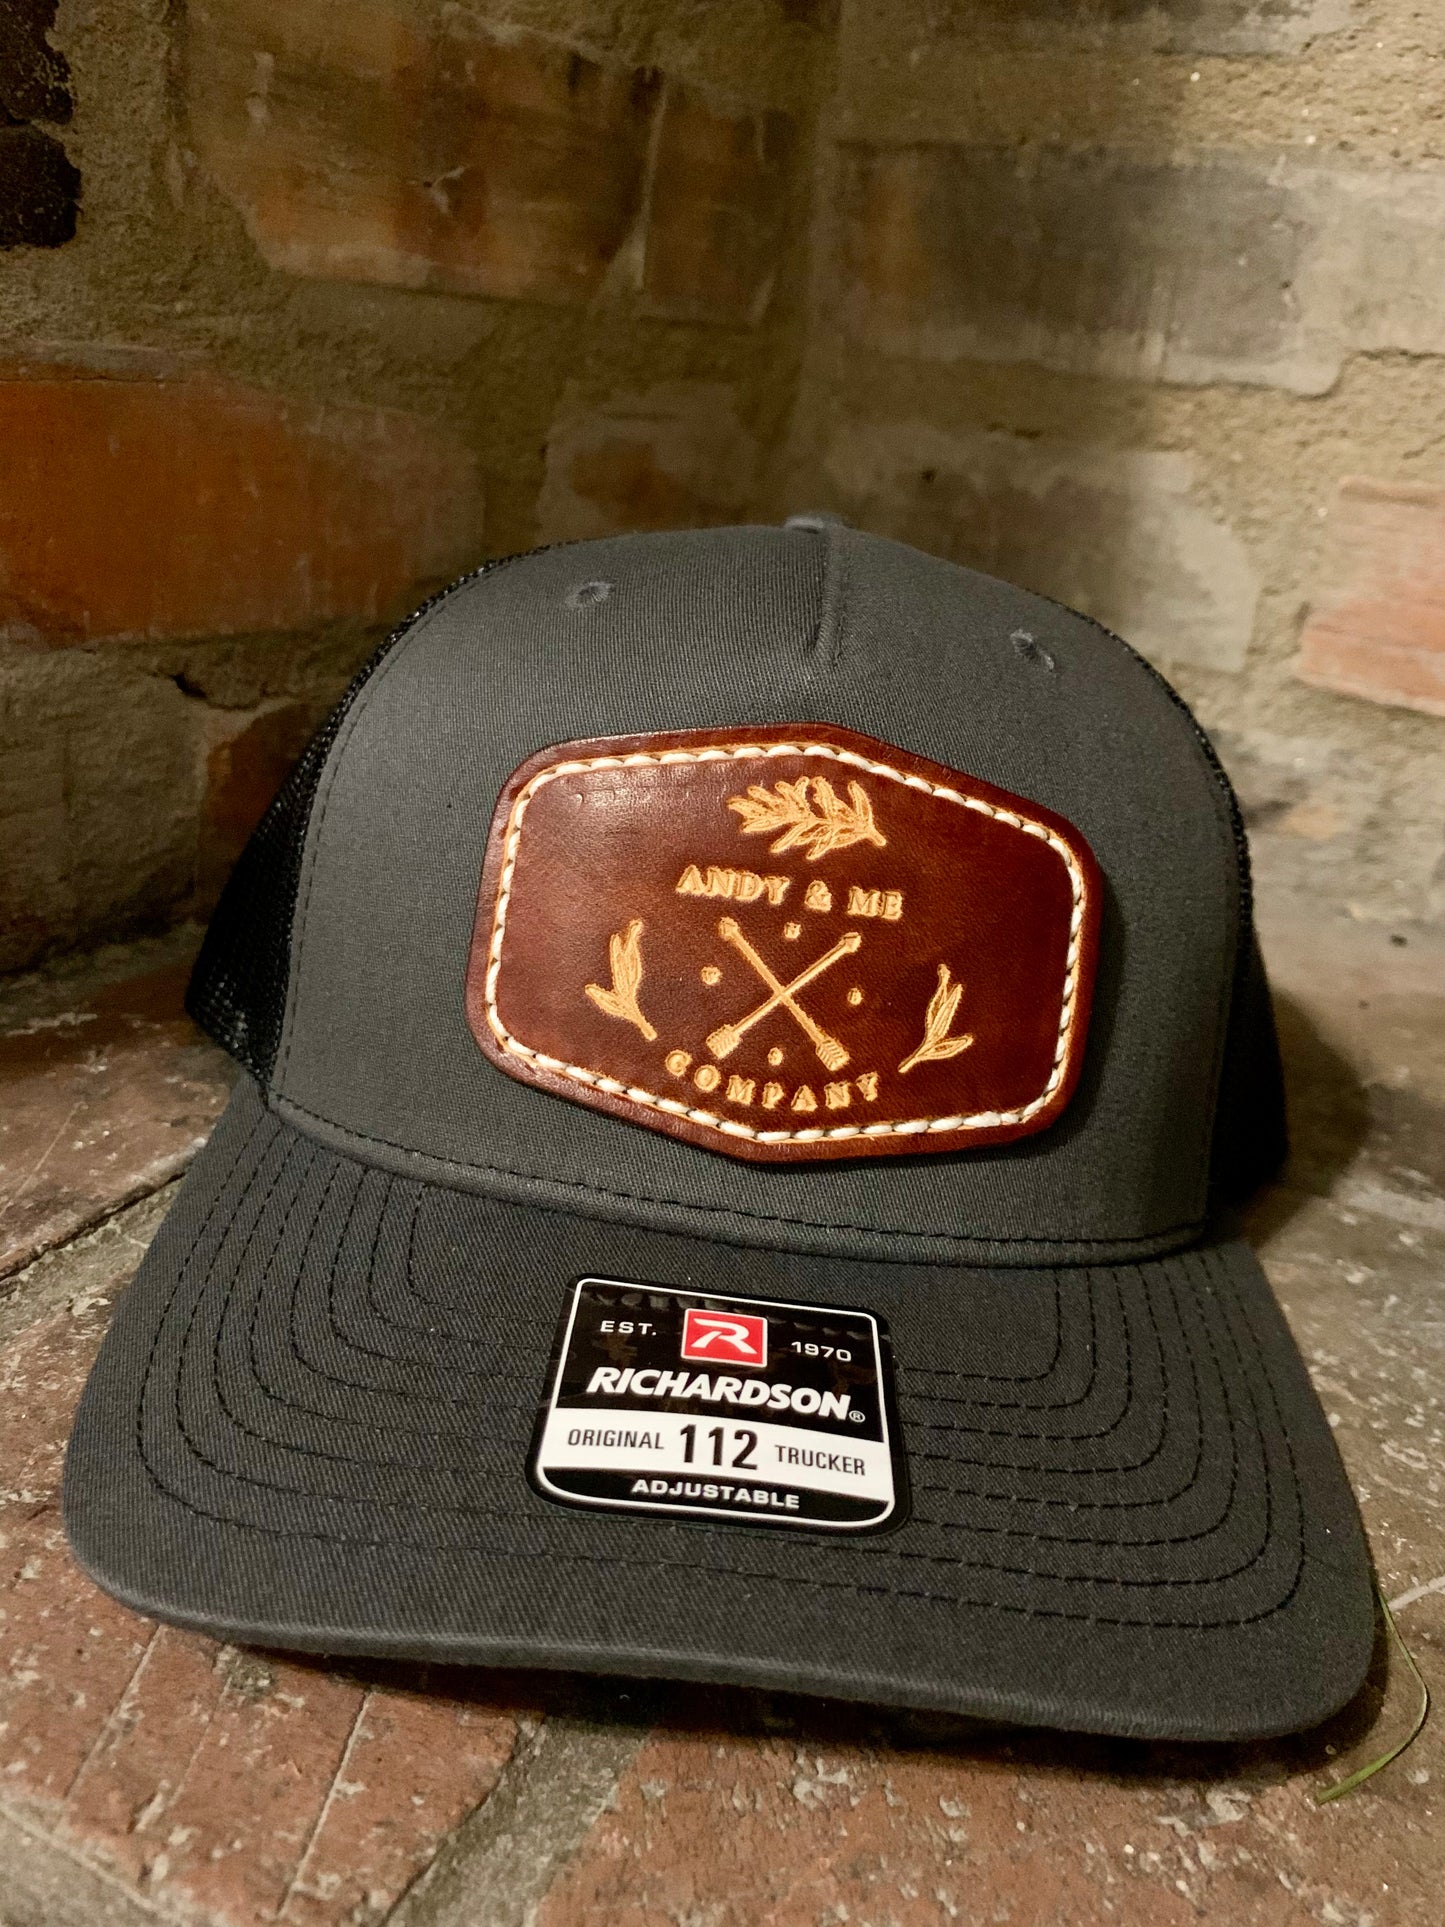 "The Classic Andy & Me" Richardson Hat